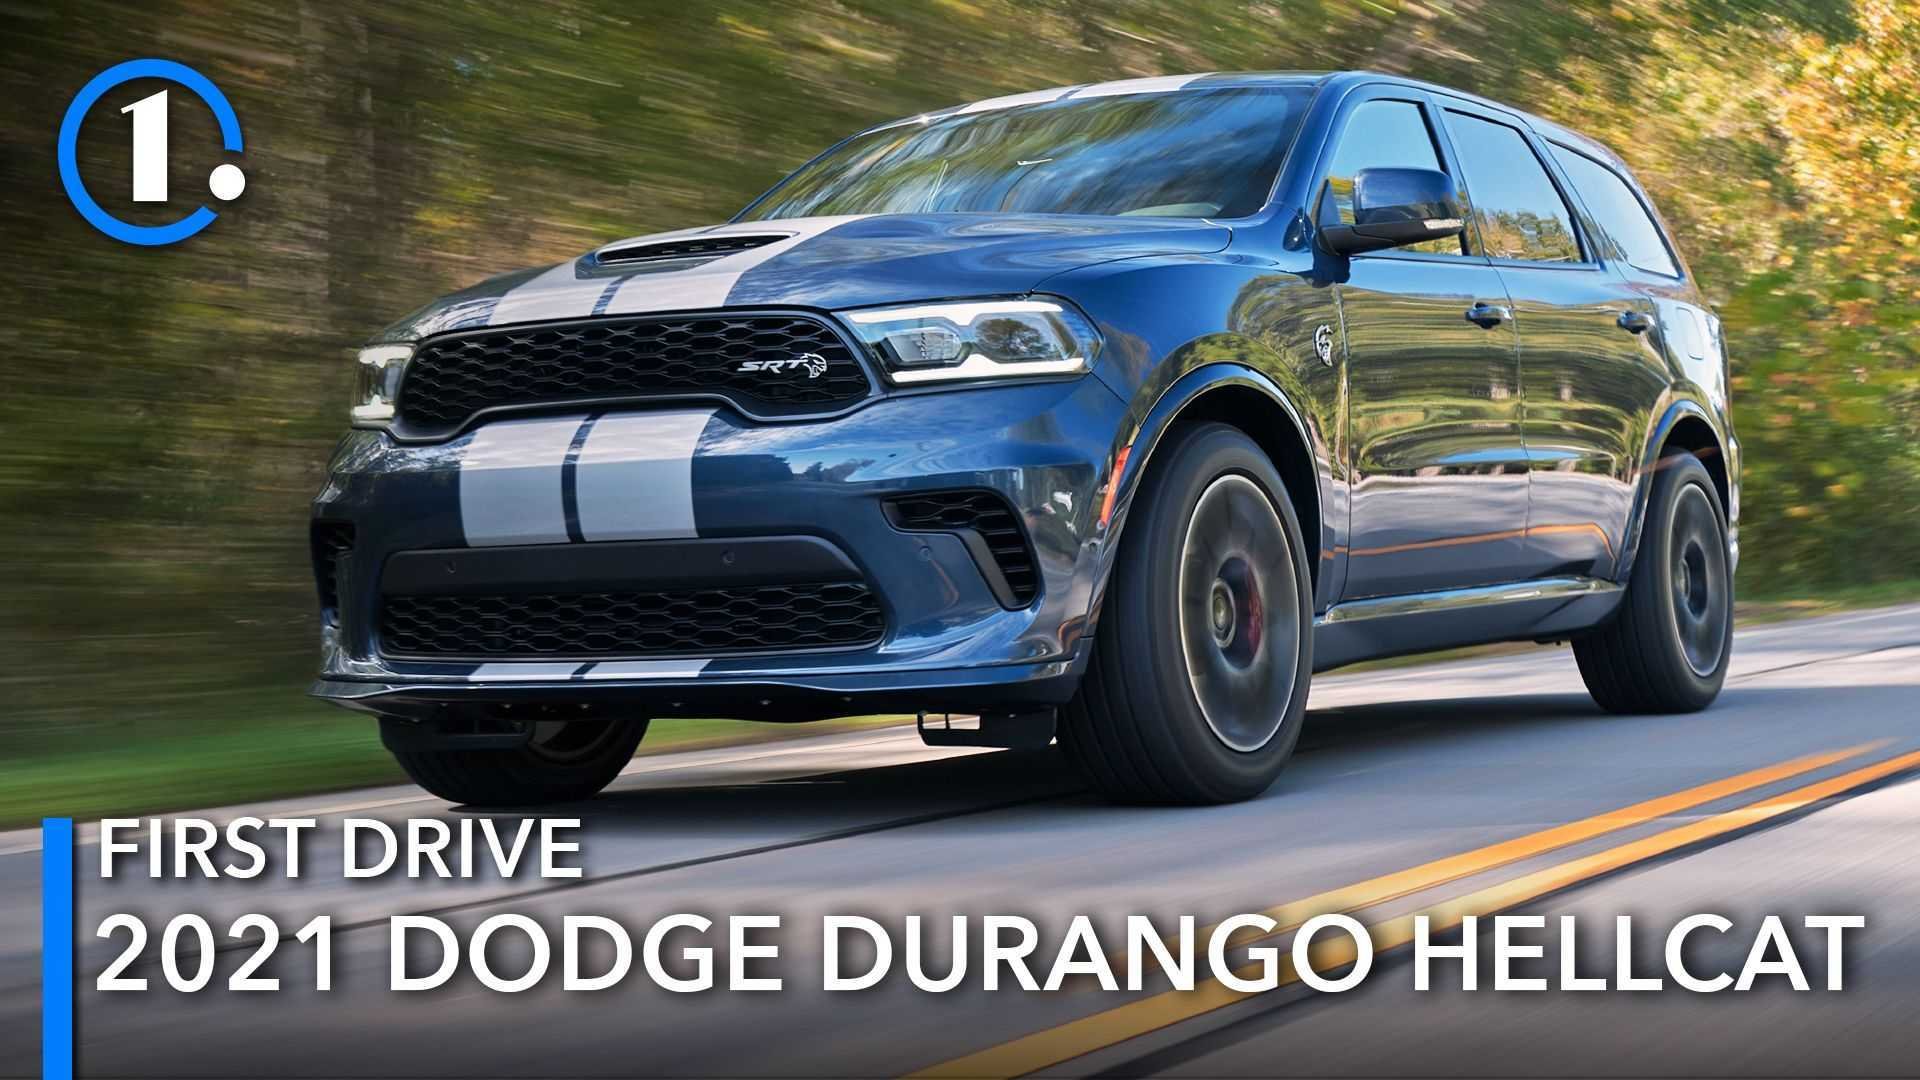 2021 Dodge Durango Hellcat First Drive Review: They Actually Did It